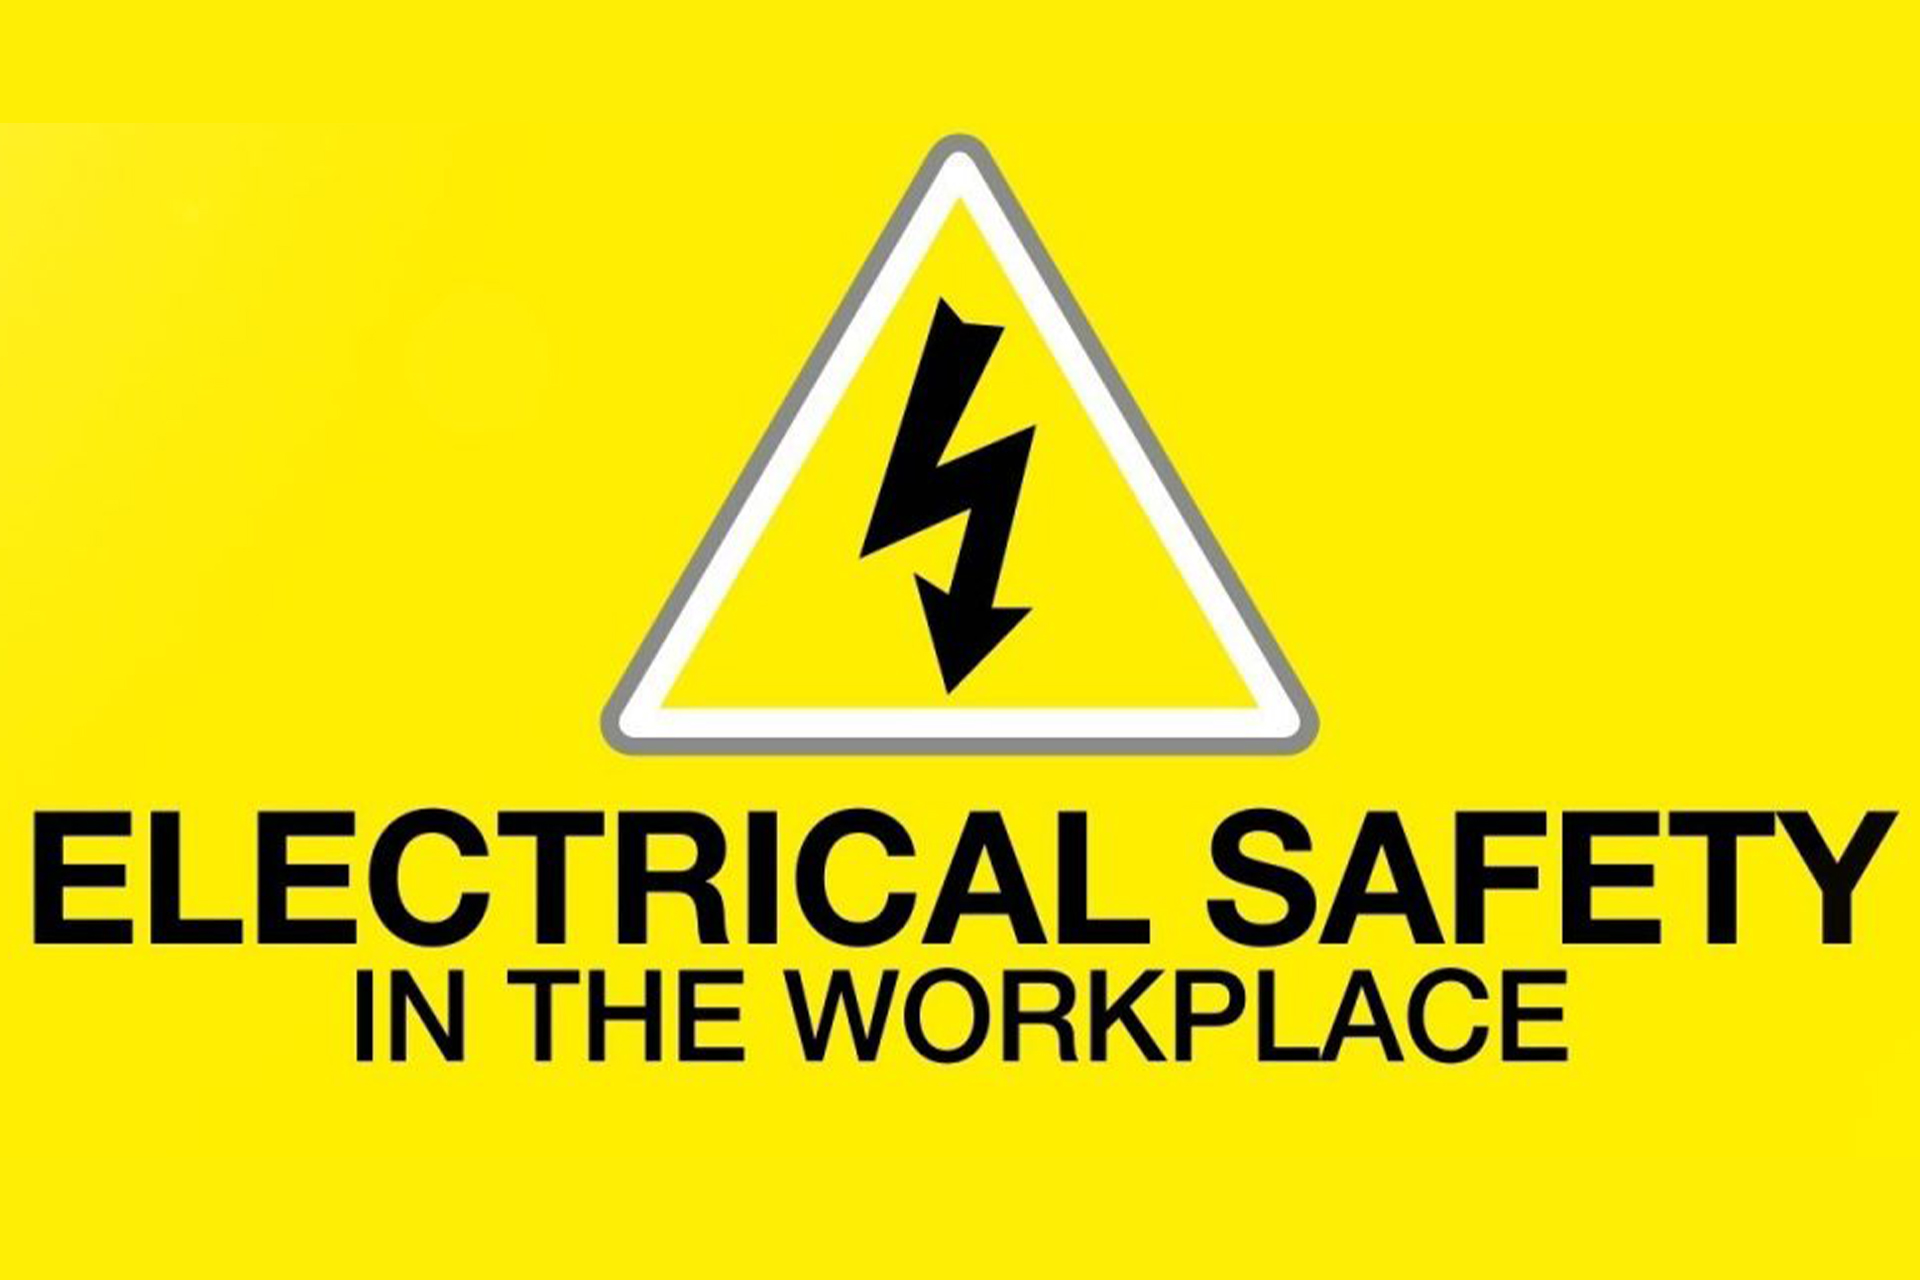 Electric warning sign